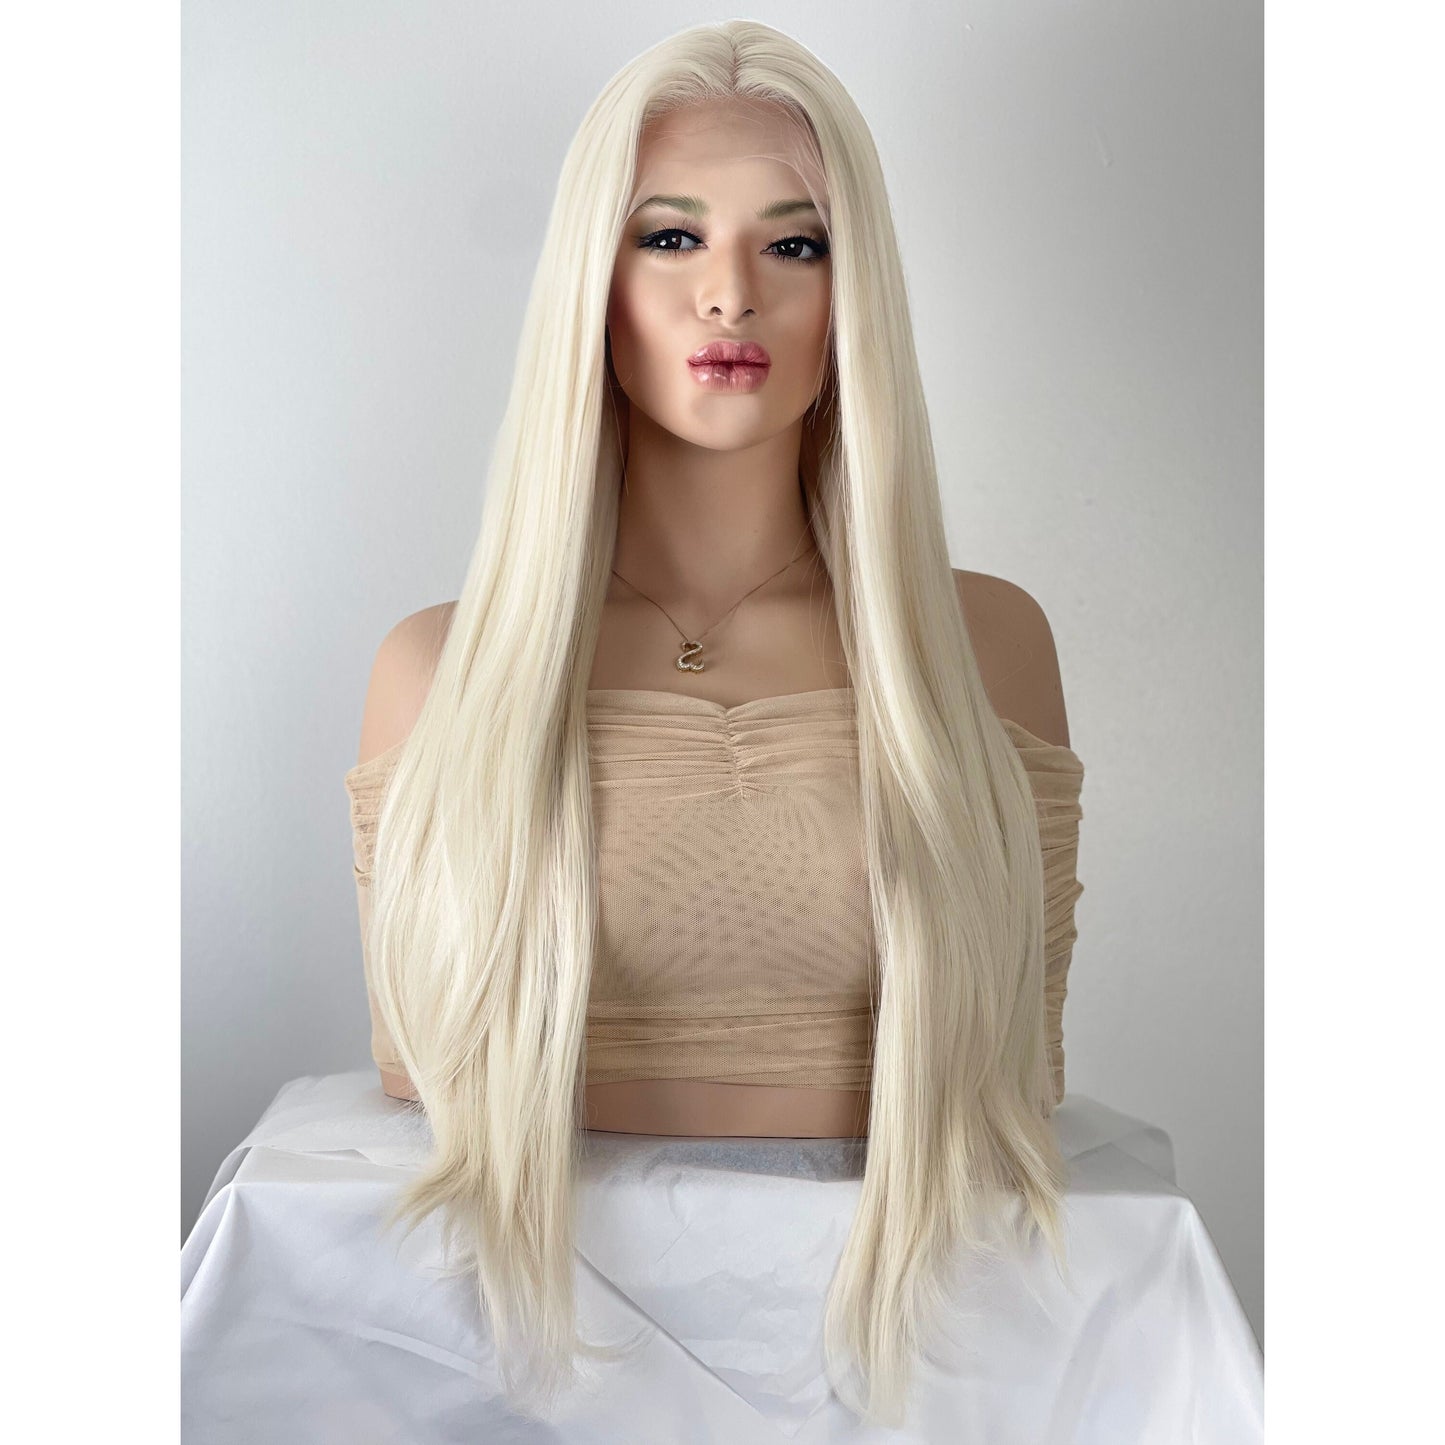 Long Platinum White Blonde Long Straight Wig, 13x3 Preplucked Free Part Wig, Swiss Lace Front, Heat Resistant Human Hair Blend Wig